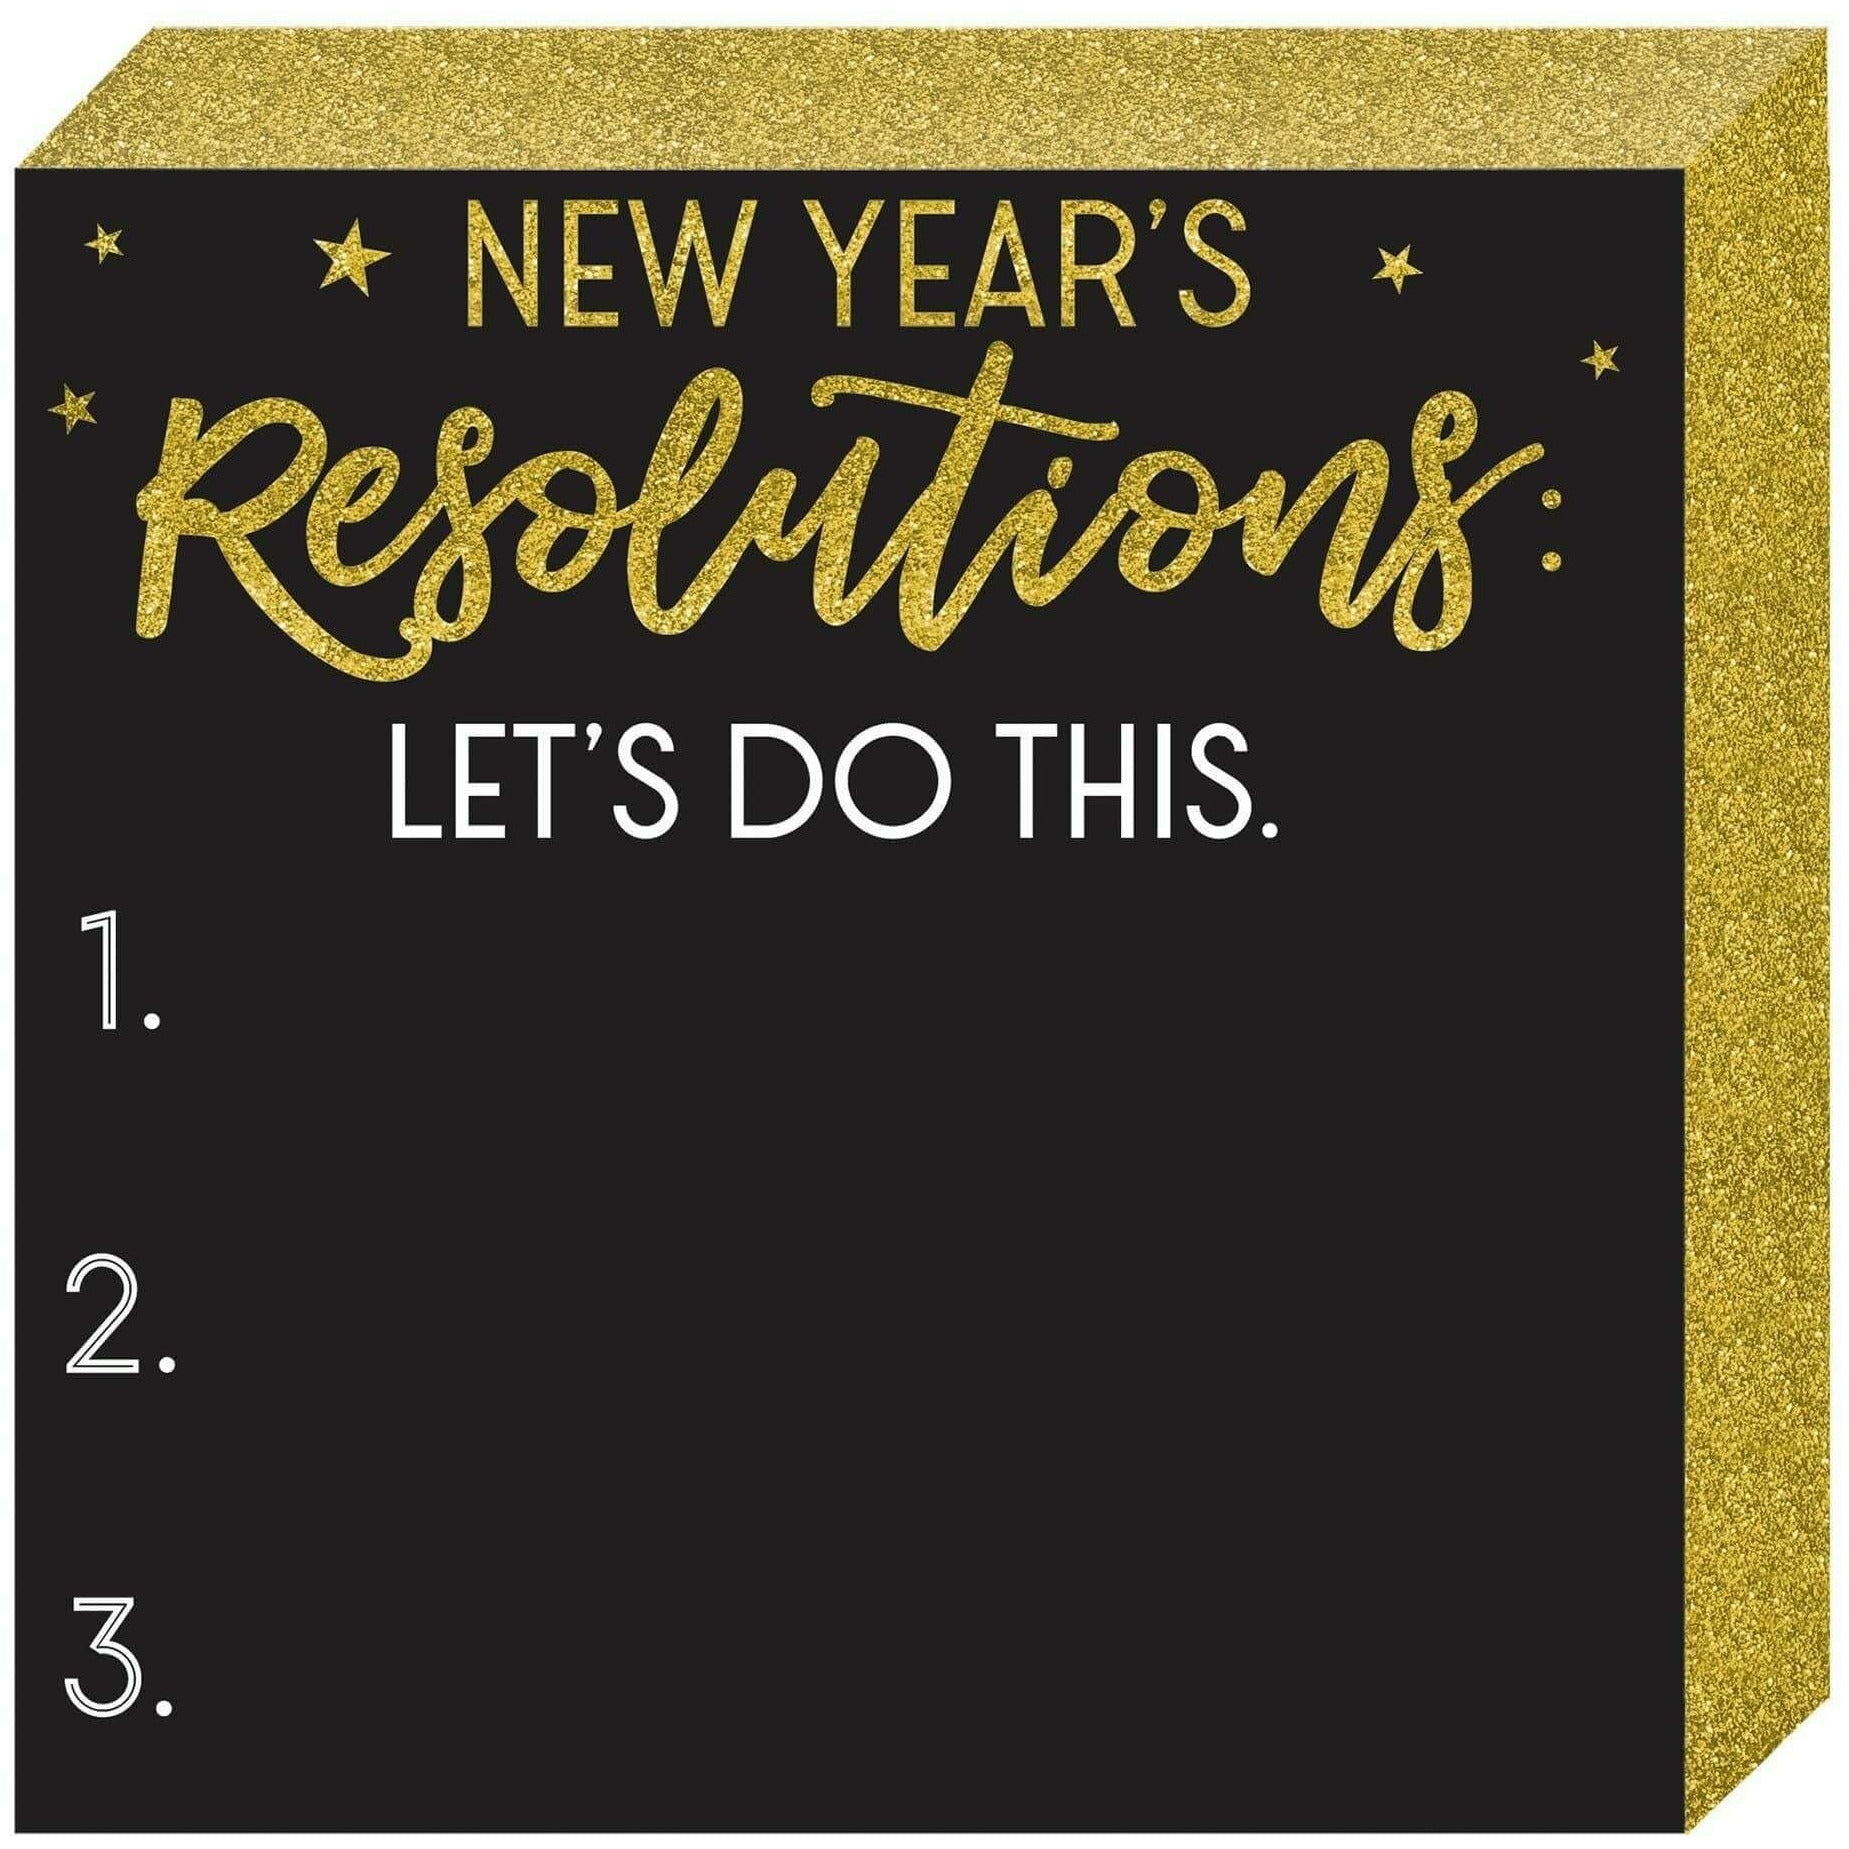 Amscan HOLIDAY: NEW YEAR'S New Year's Resolutions Square Chalkboard Standing Plaque